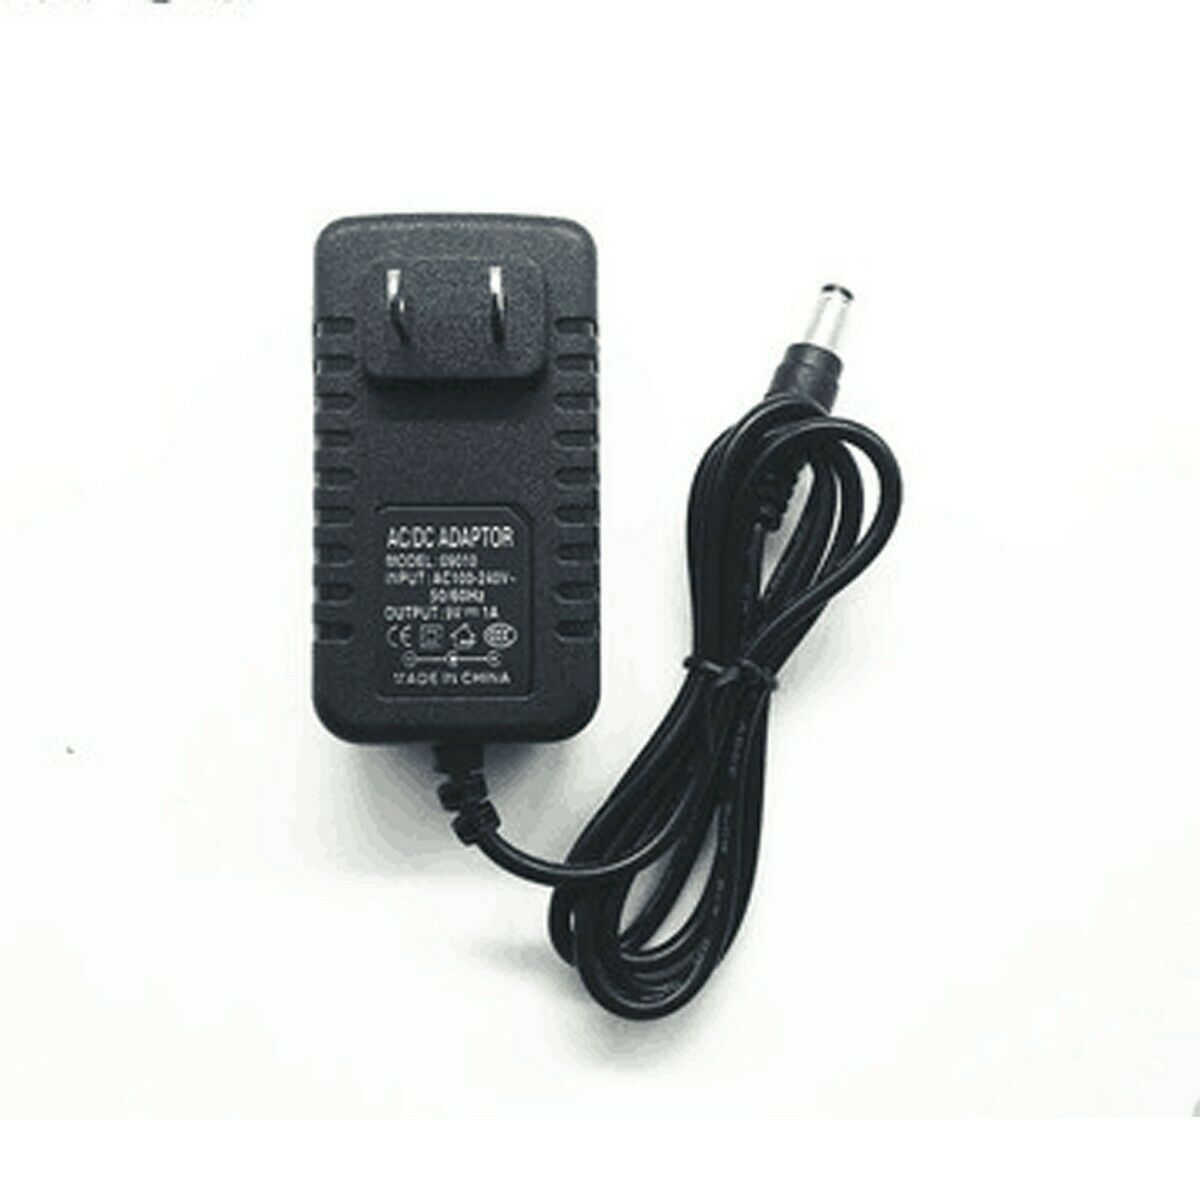 *Brand NEW*For Honeywell 46-00525 Power Supply MS95XX VOYAGER 1200G 4600525 AC - DC Adapter